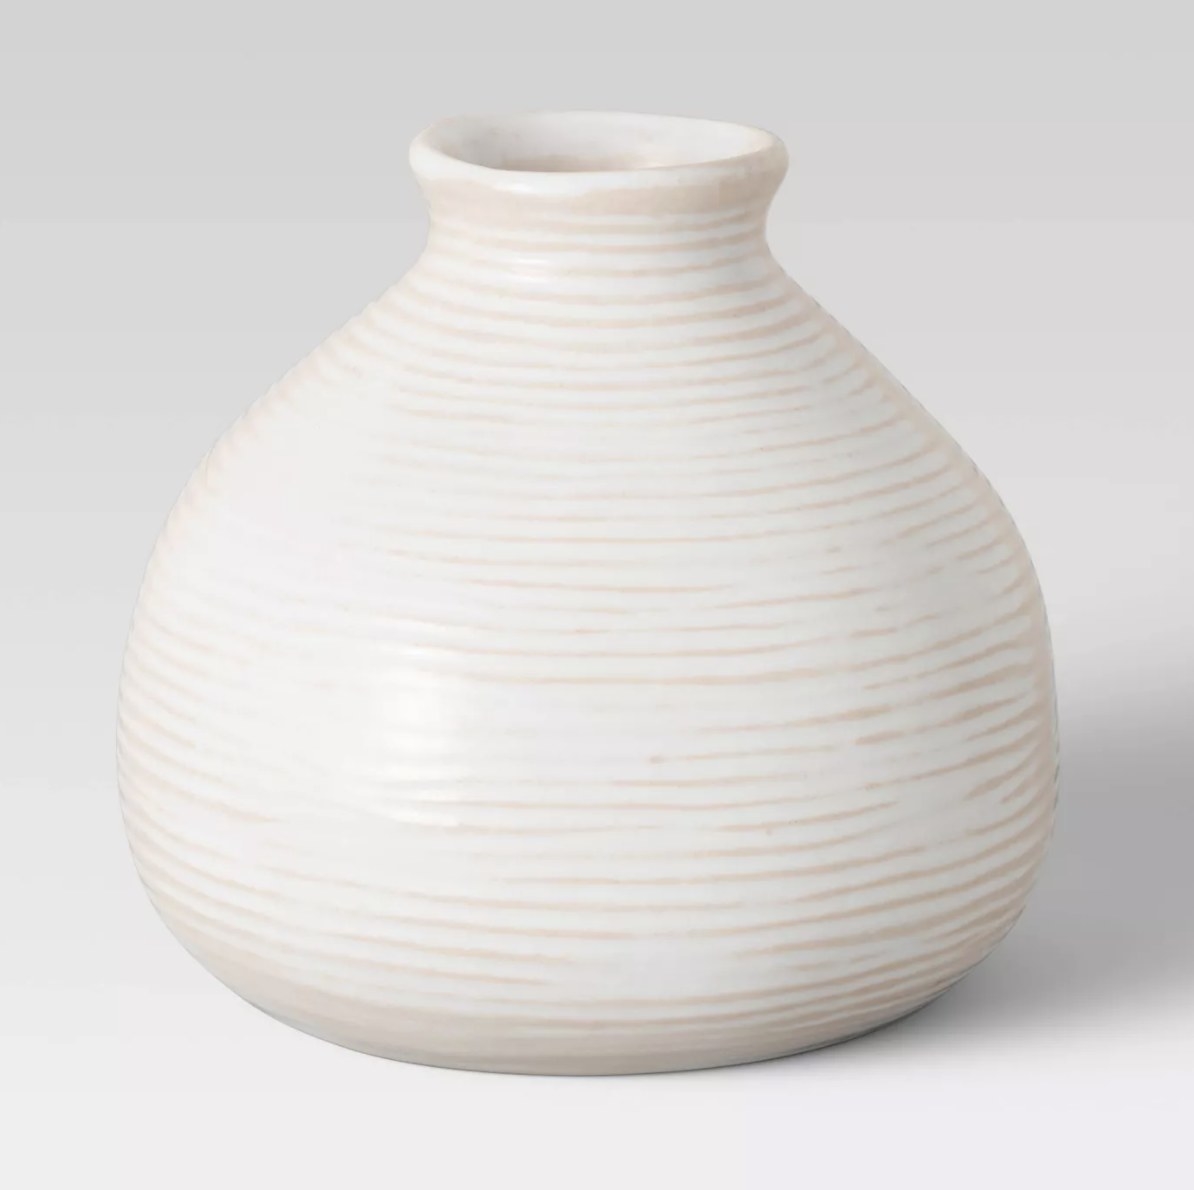 The white vase has a wide bottom and narrows toward the top and is covered in a semi-clear white glaze